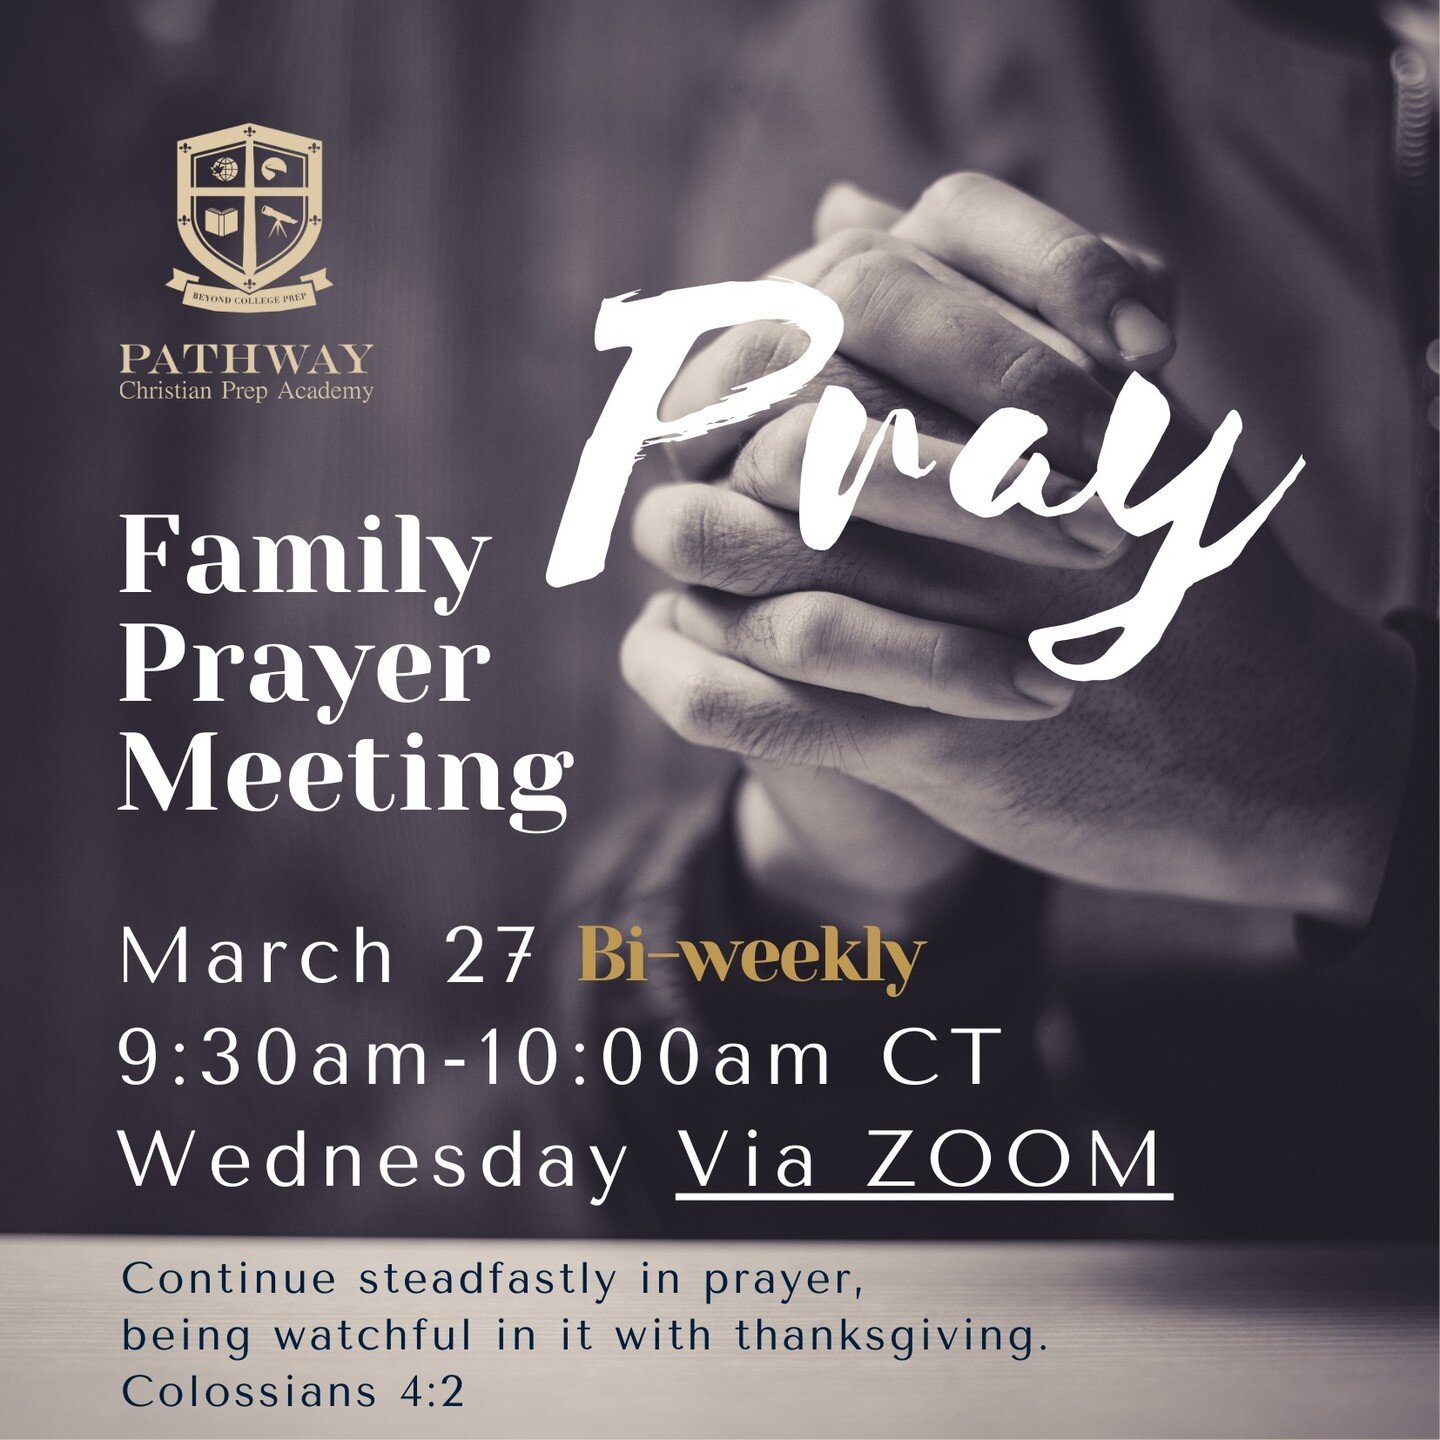 our bi-weekly family prayer time is coming up soon on Wednesday, March 27th at 9:30 AM CT. We believe that prayer is a powerful tool to uplift and support our students, families, schools, and community.  We look forward to praying alongside you and o